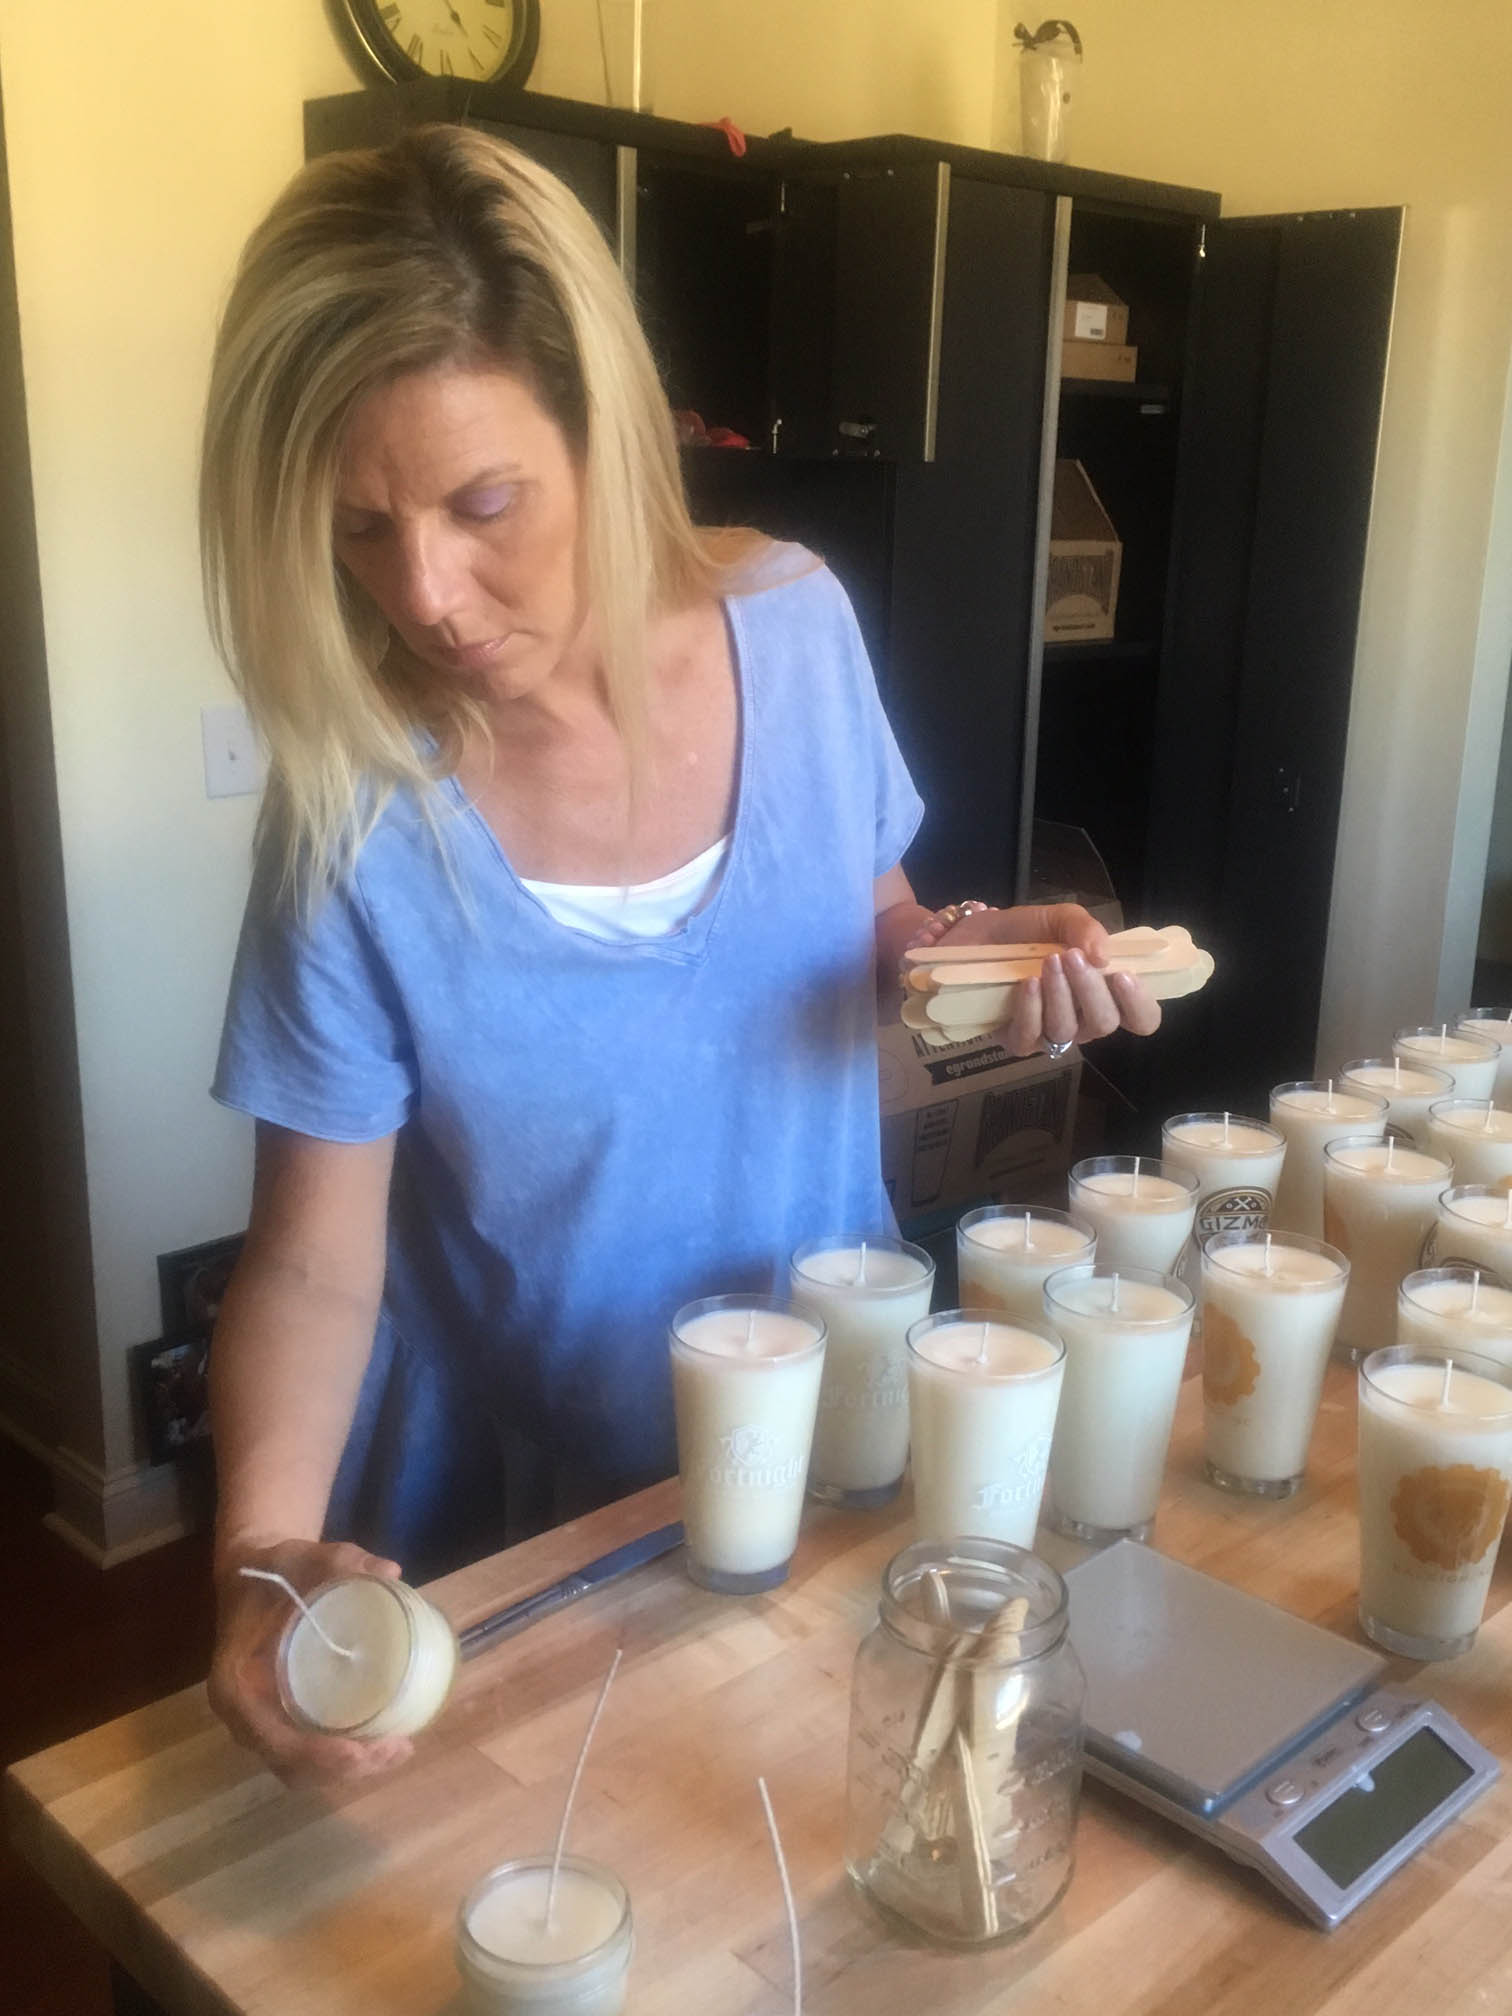 Read the full story, Candle maker sparks new flame in market, assisted by CCCC Small Business Center